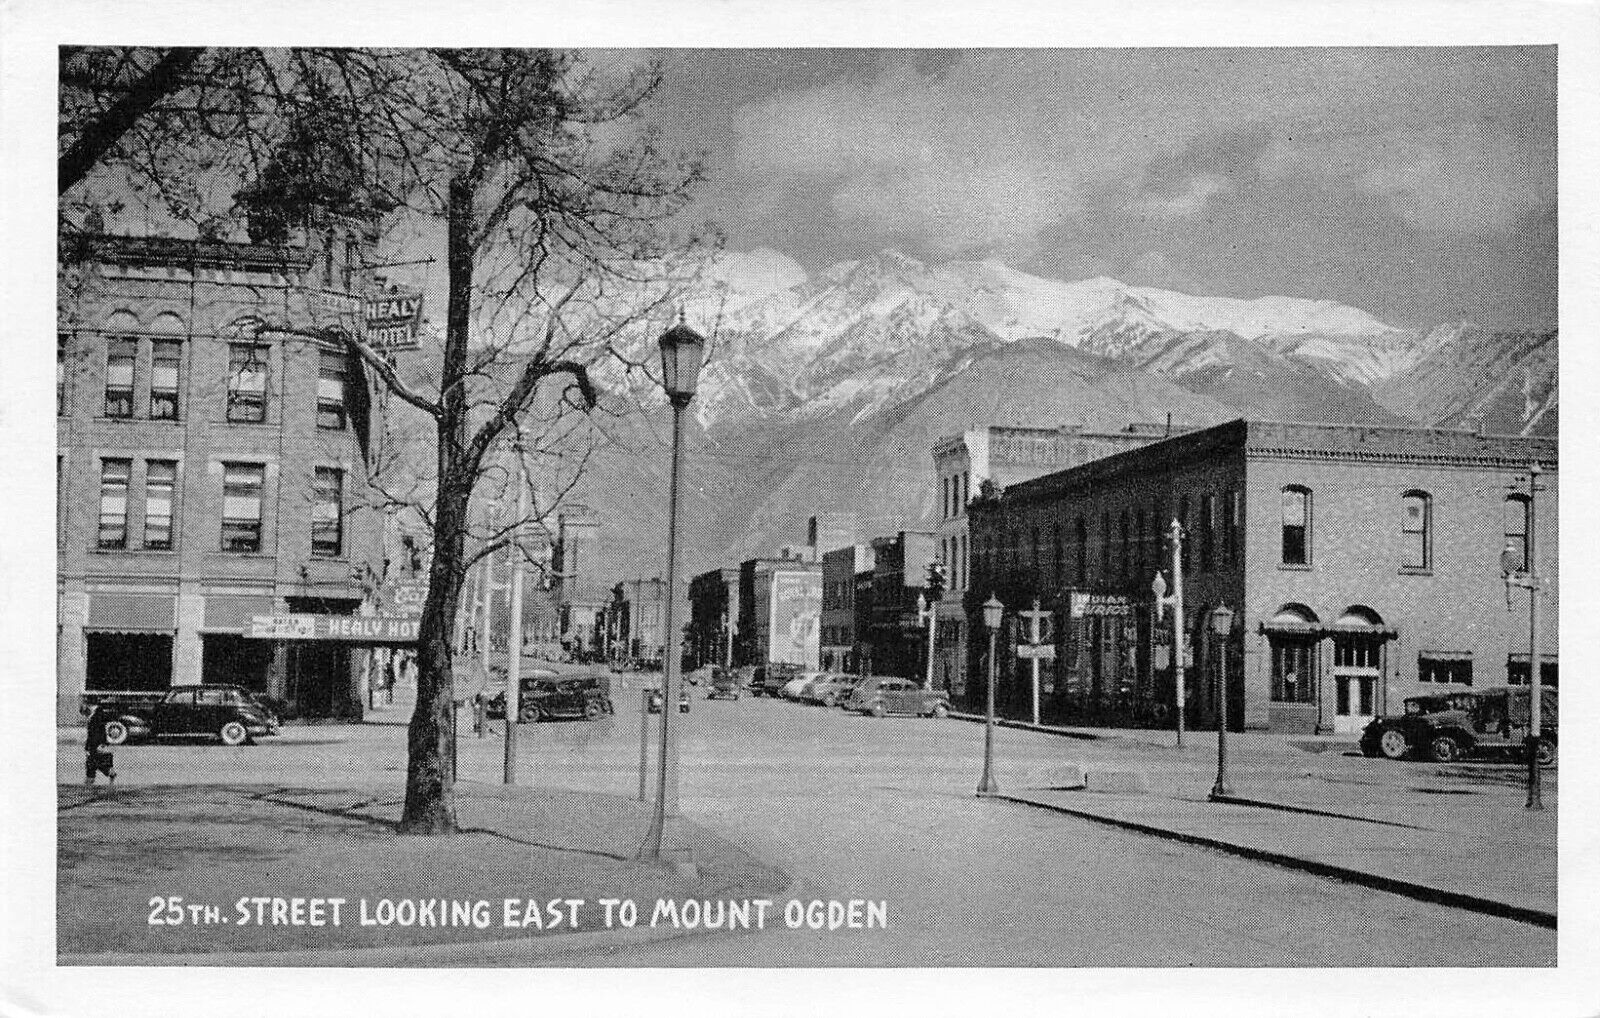 25th Street Looking East to Mount Ogden Postcard